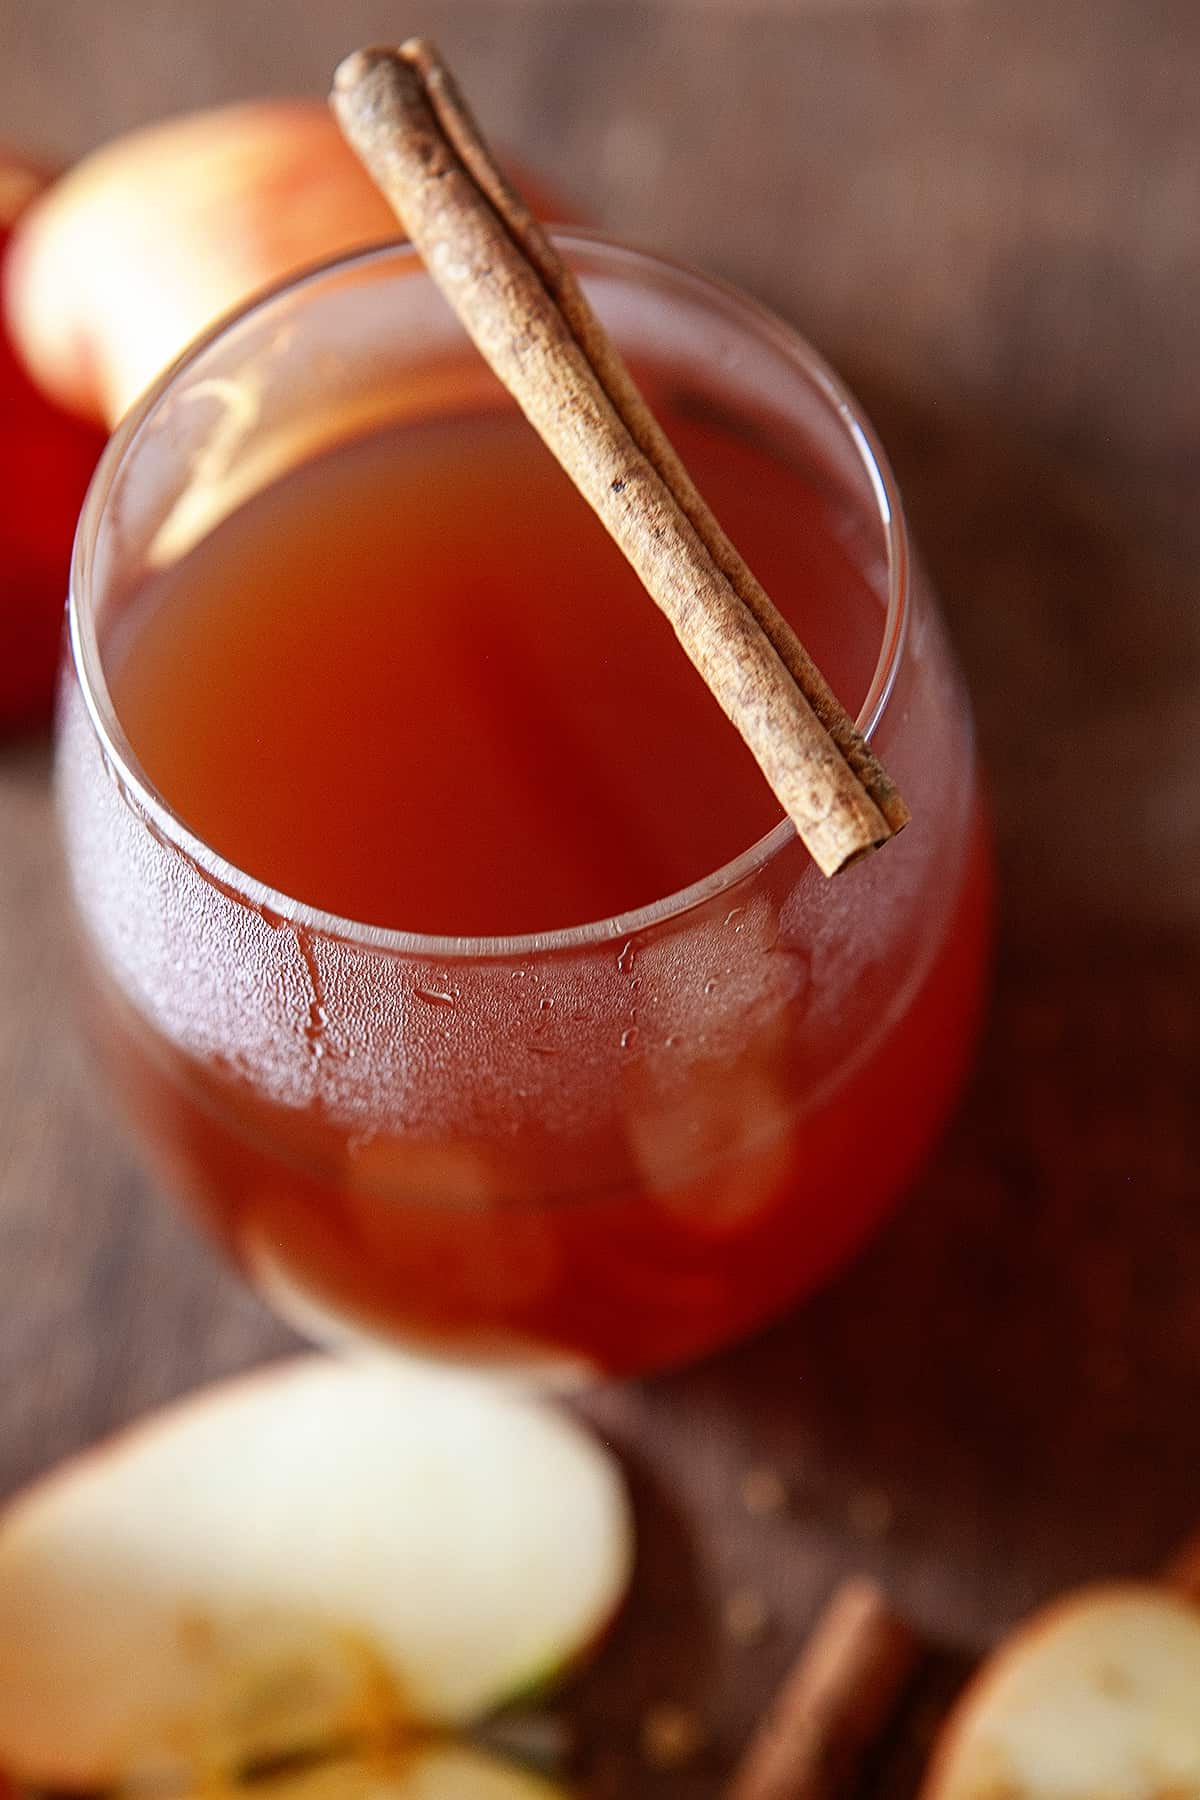 Slight overhead view and close-up of a glass of hot apple cider with a cinnamon stick on top of the glass.